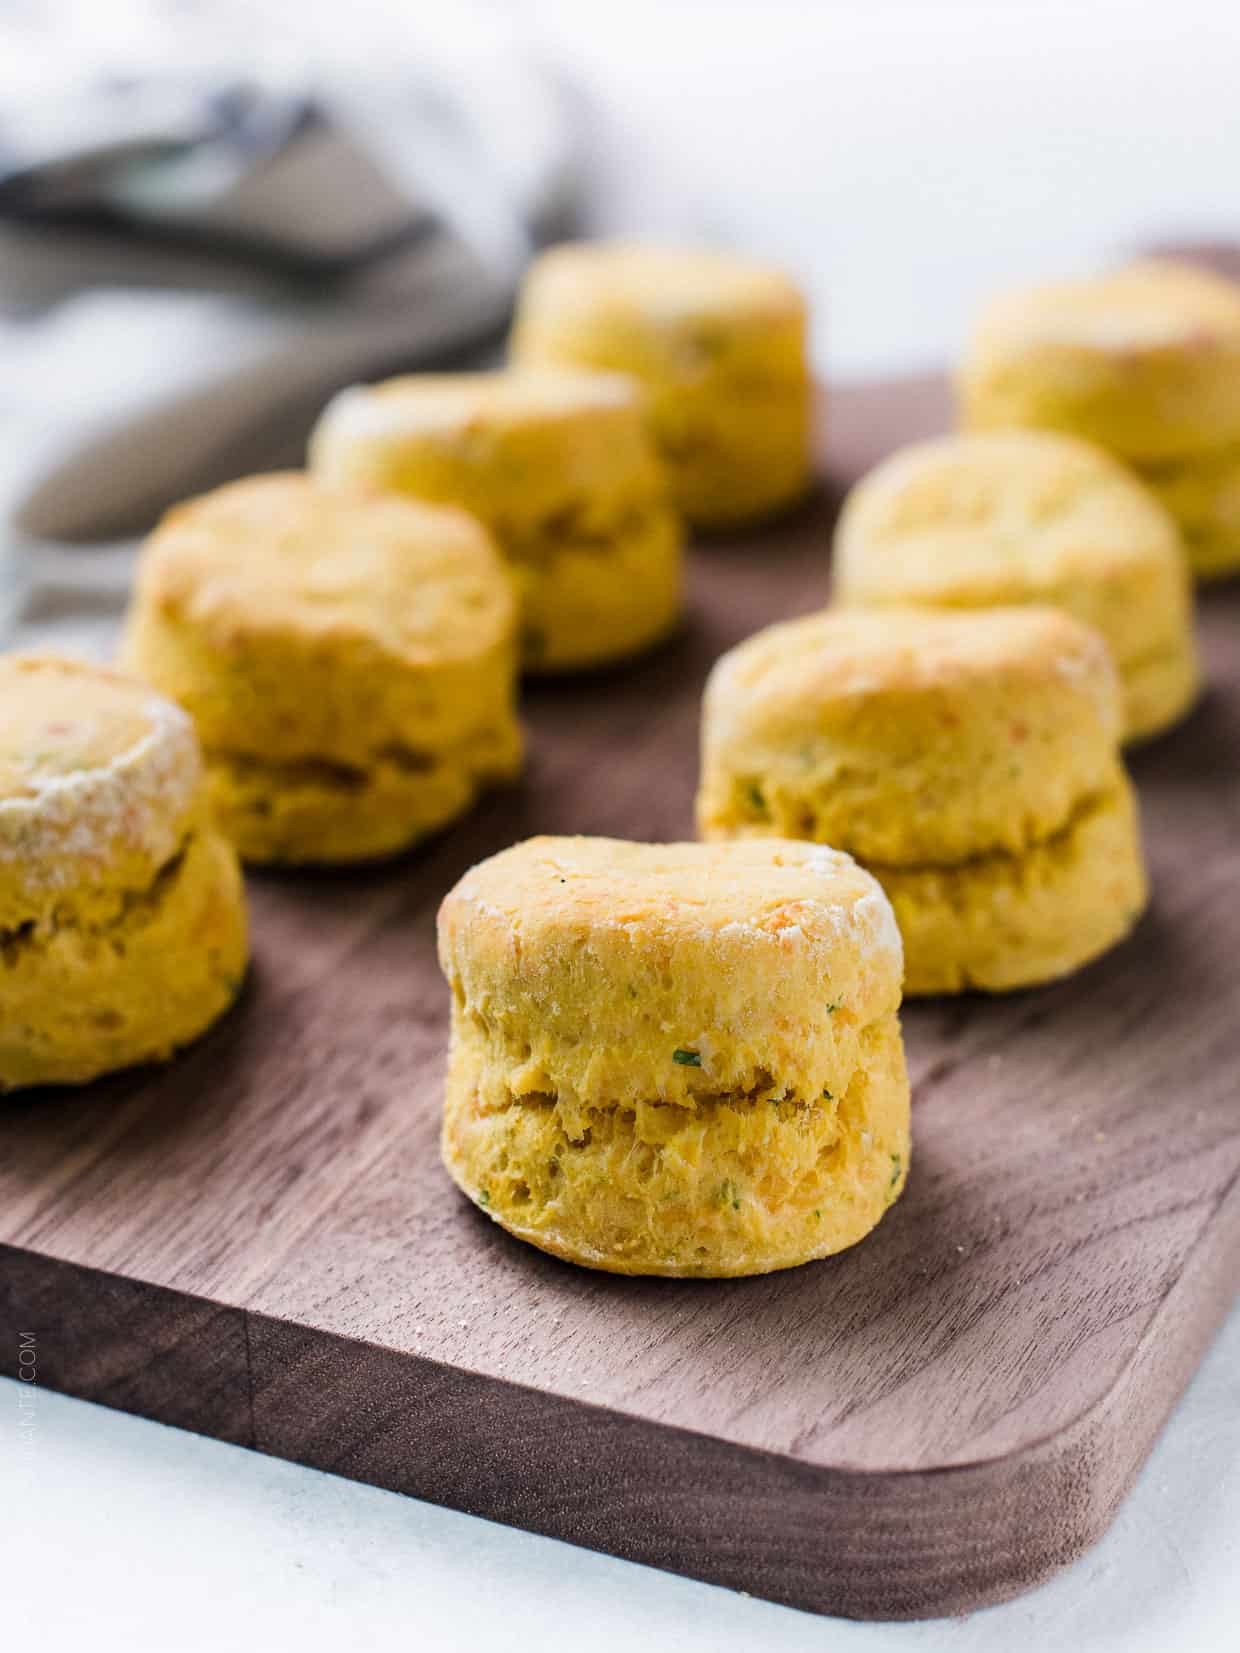 Pumpkin Cheddar Biscuits freshly baked and served on a wooden board.